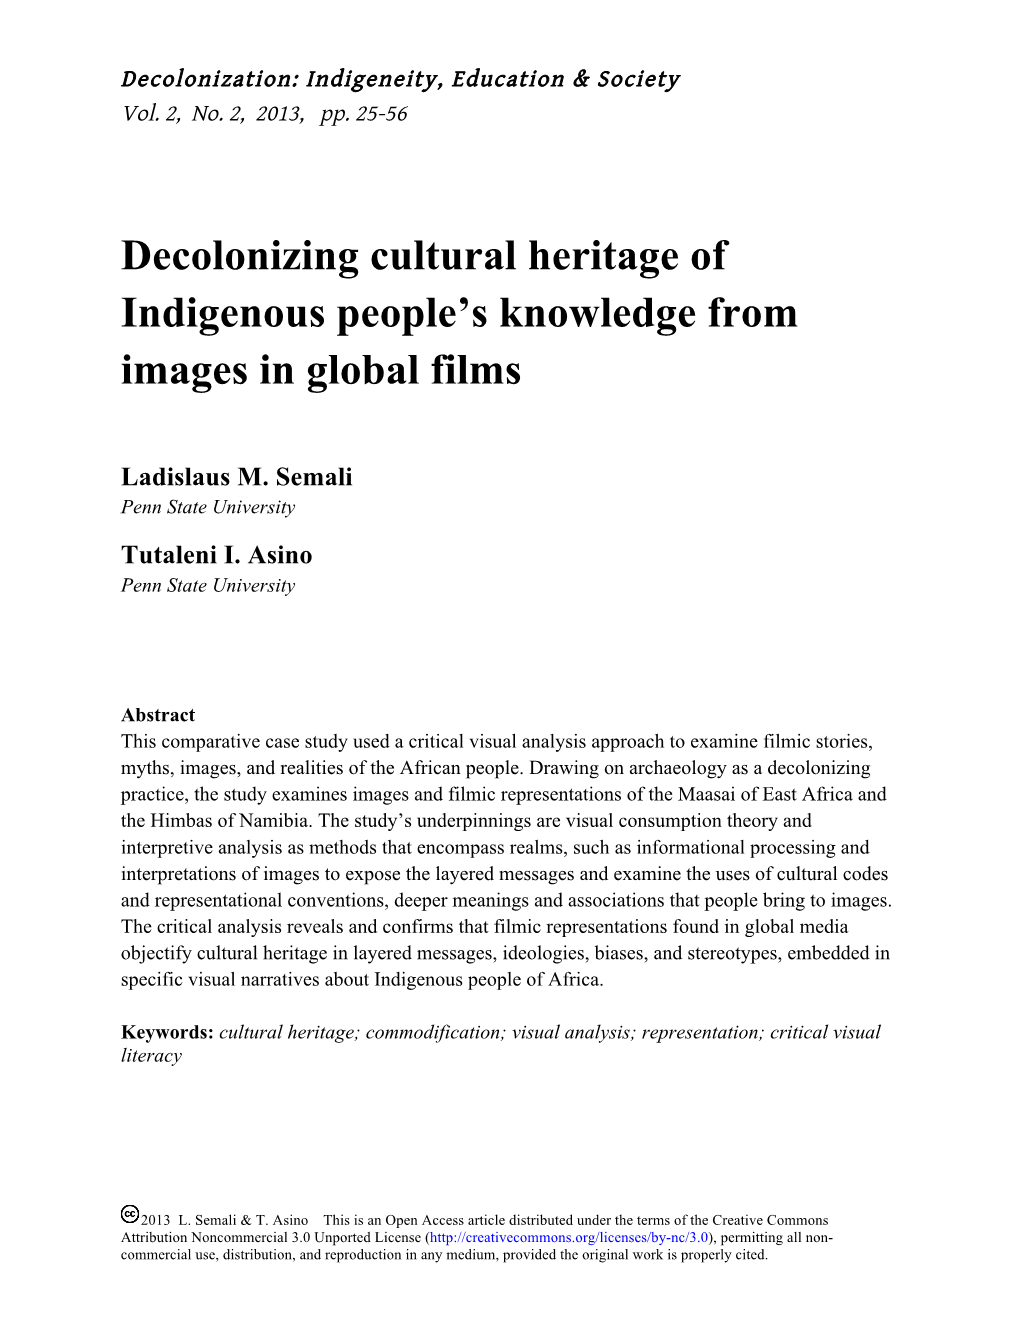 Decolonizing Cultural Heritage of Indigenous People's Knowledge